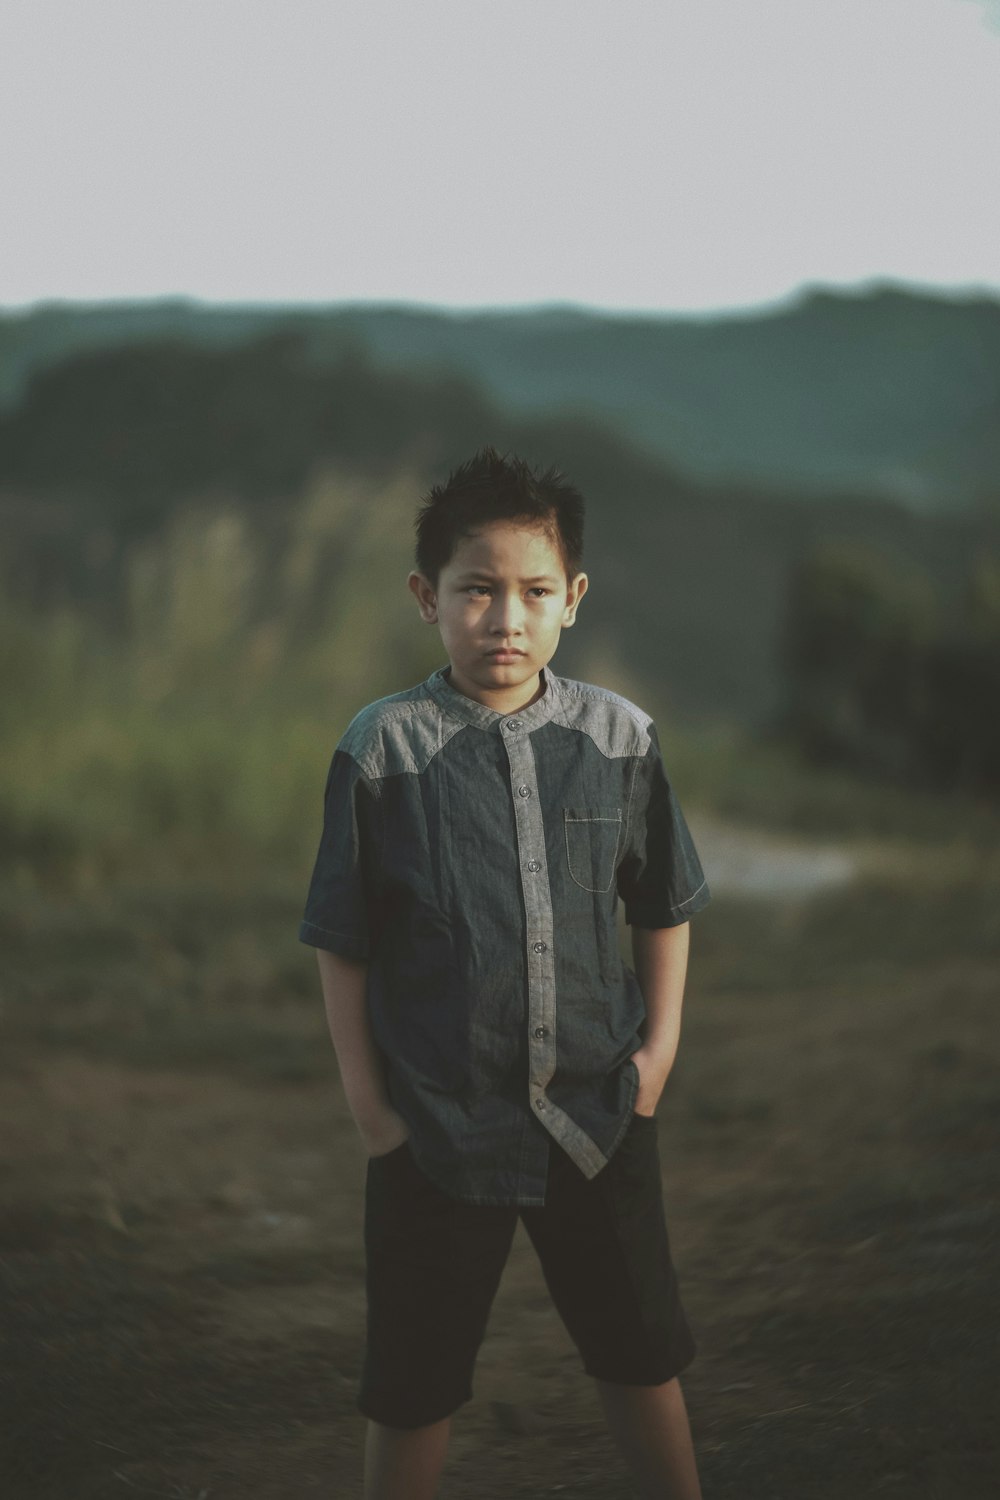 a young boy standing in a dirt field